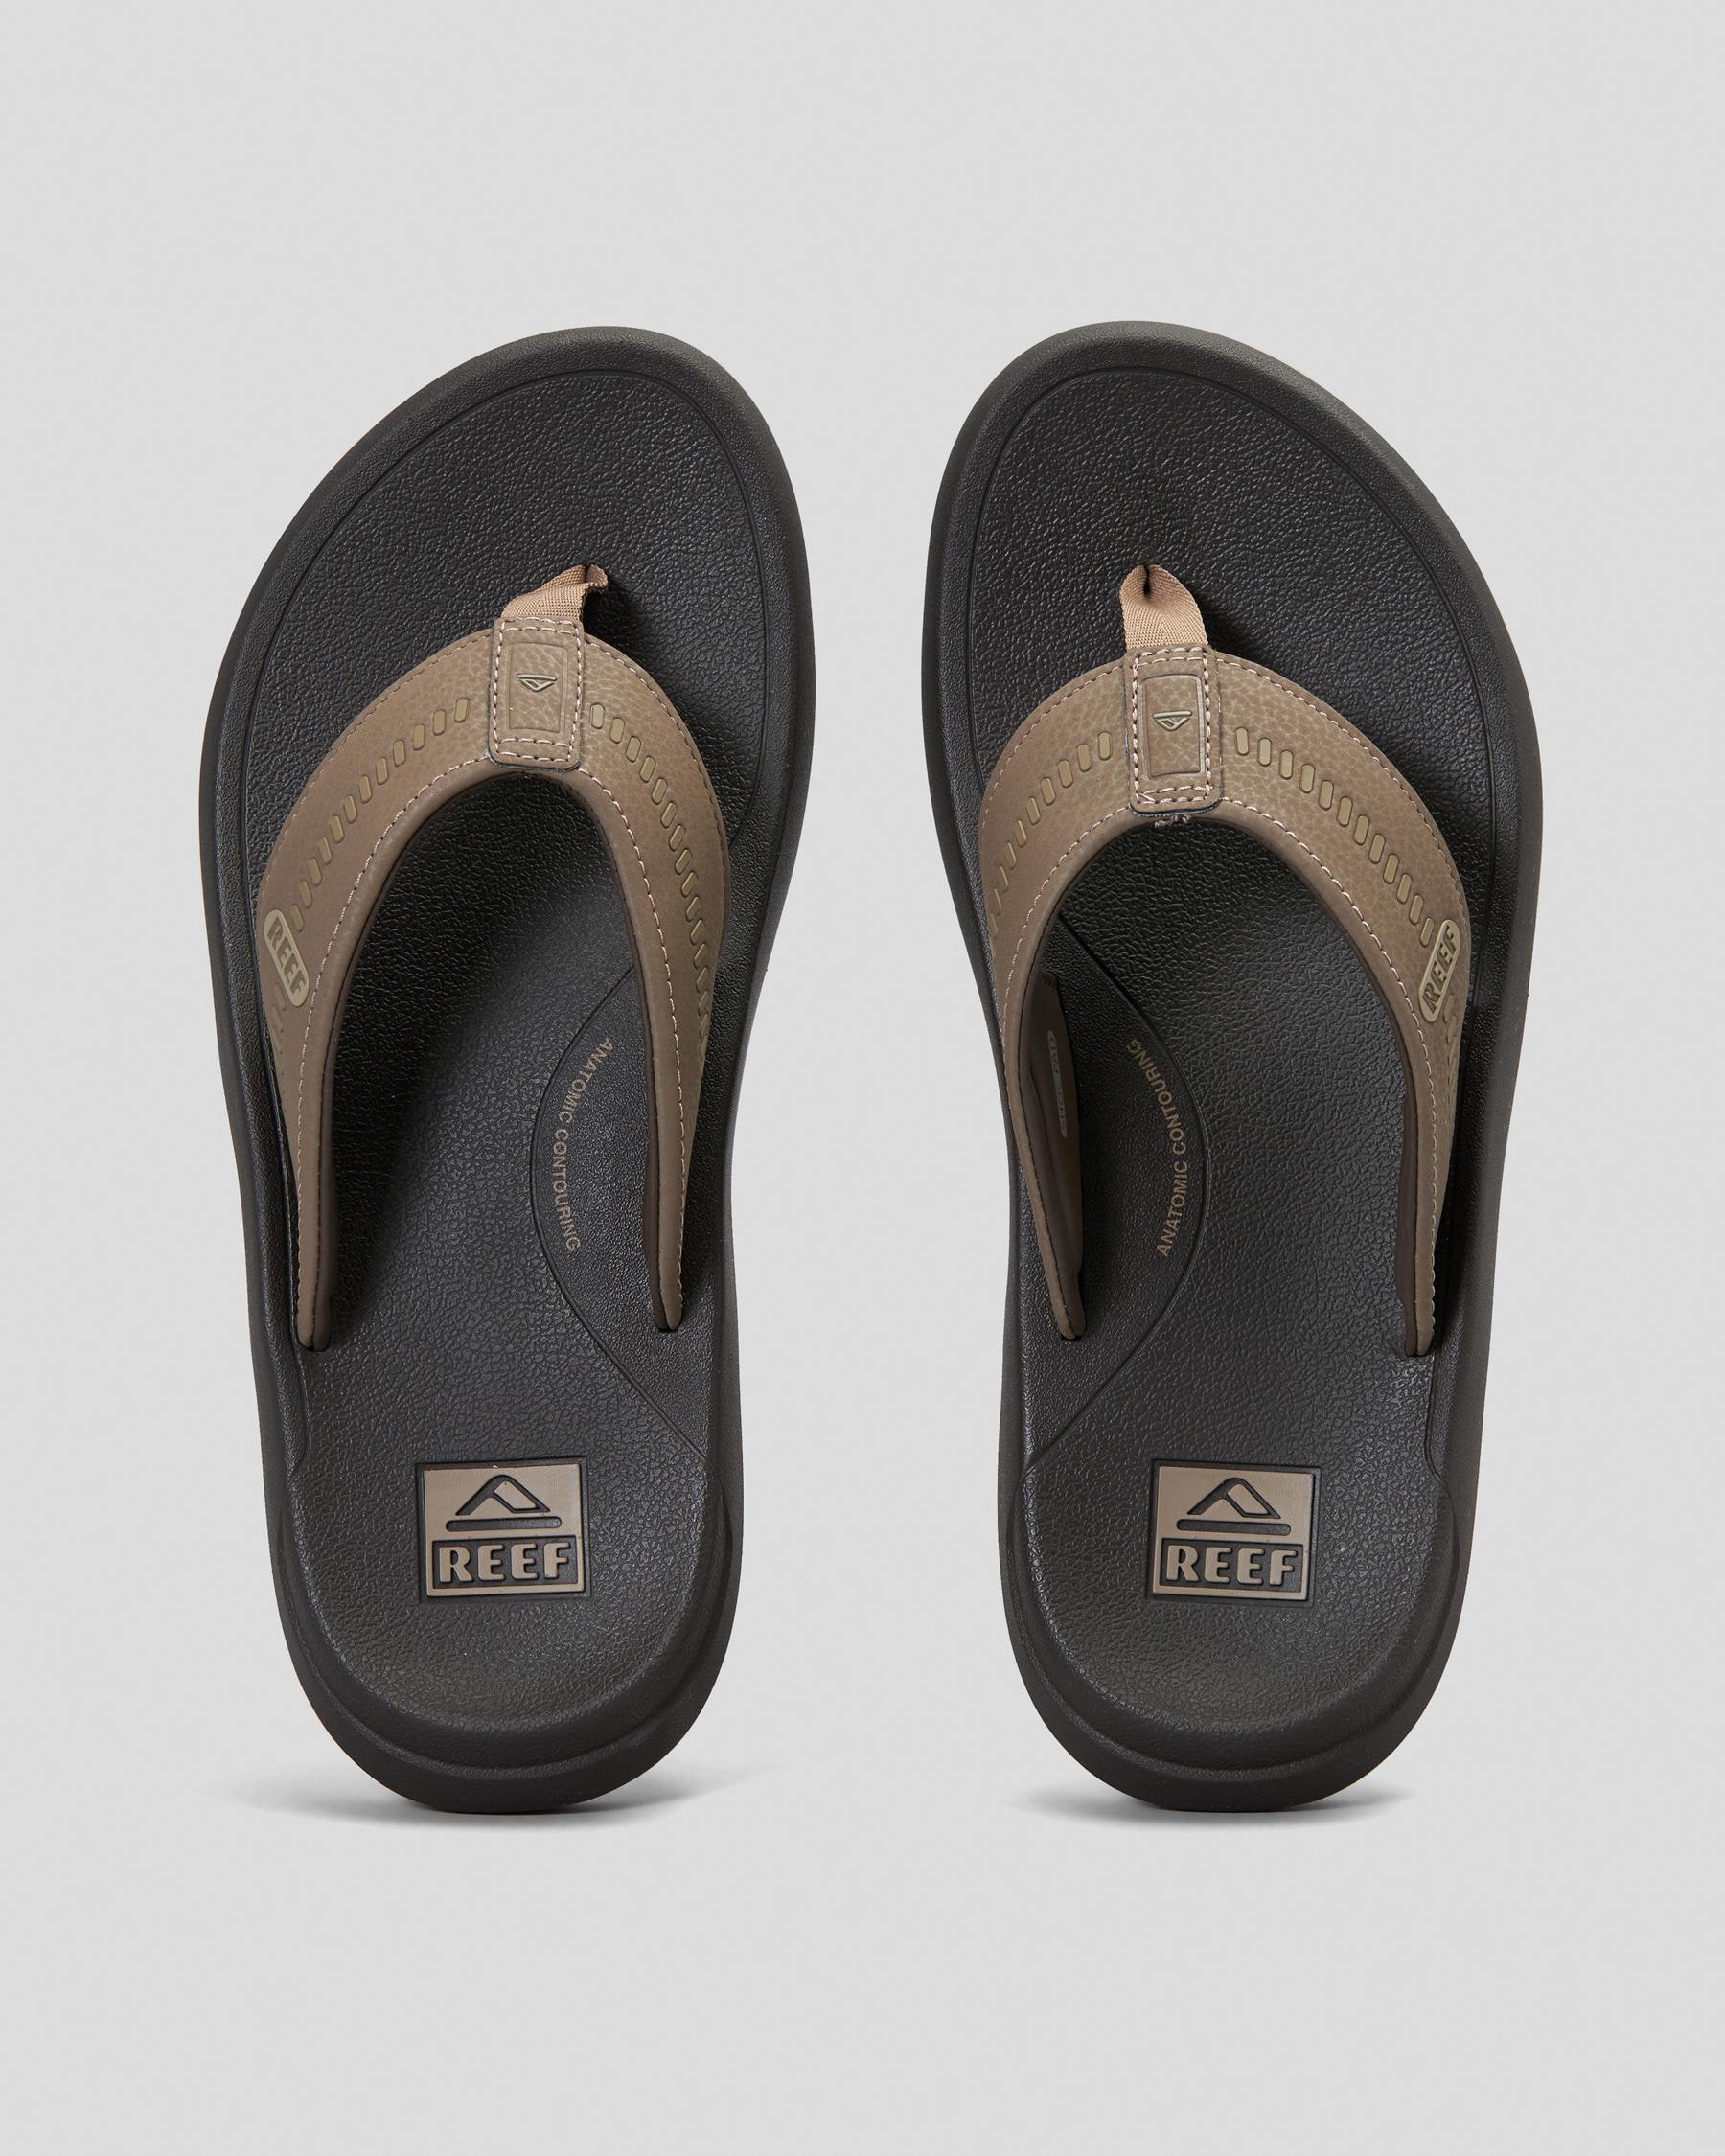 Reef Swellsole Cruiser Thongs In Brown/tan - Fast Shipping & Easy ...